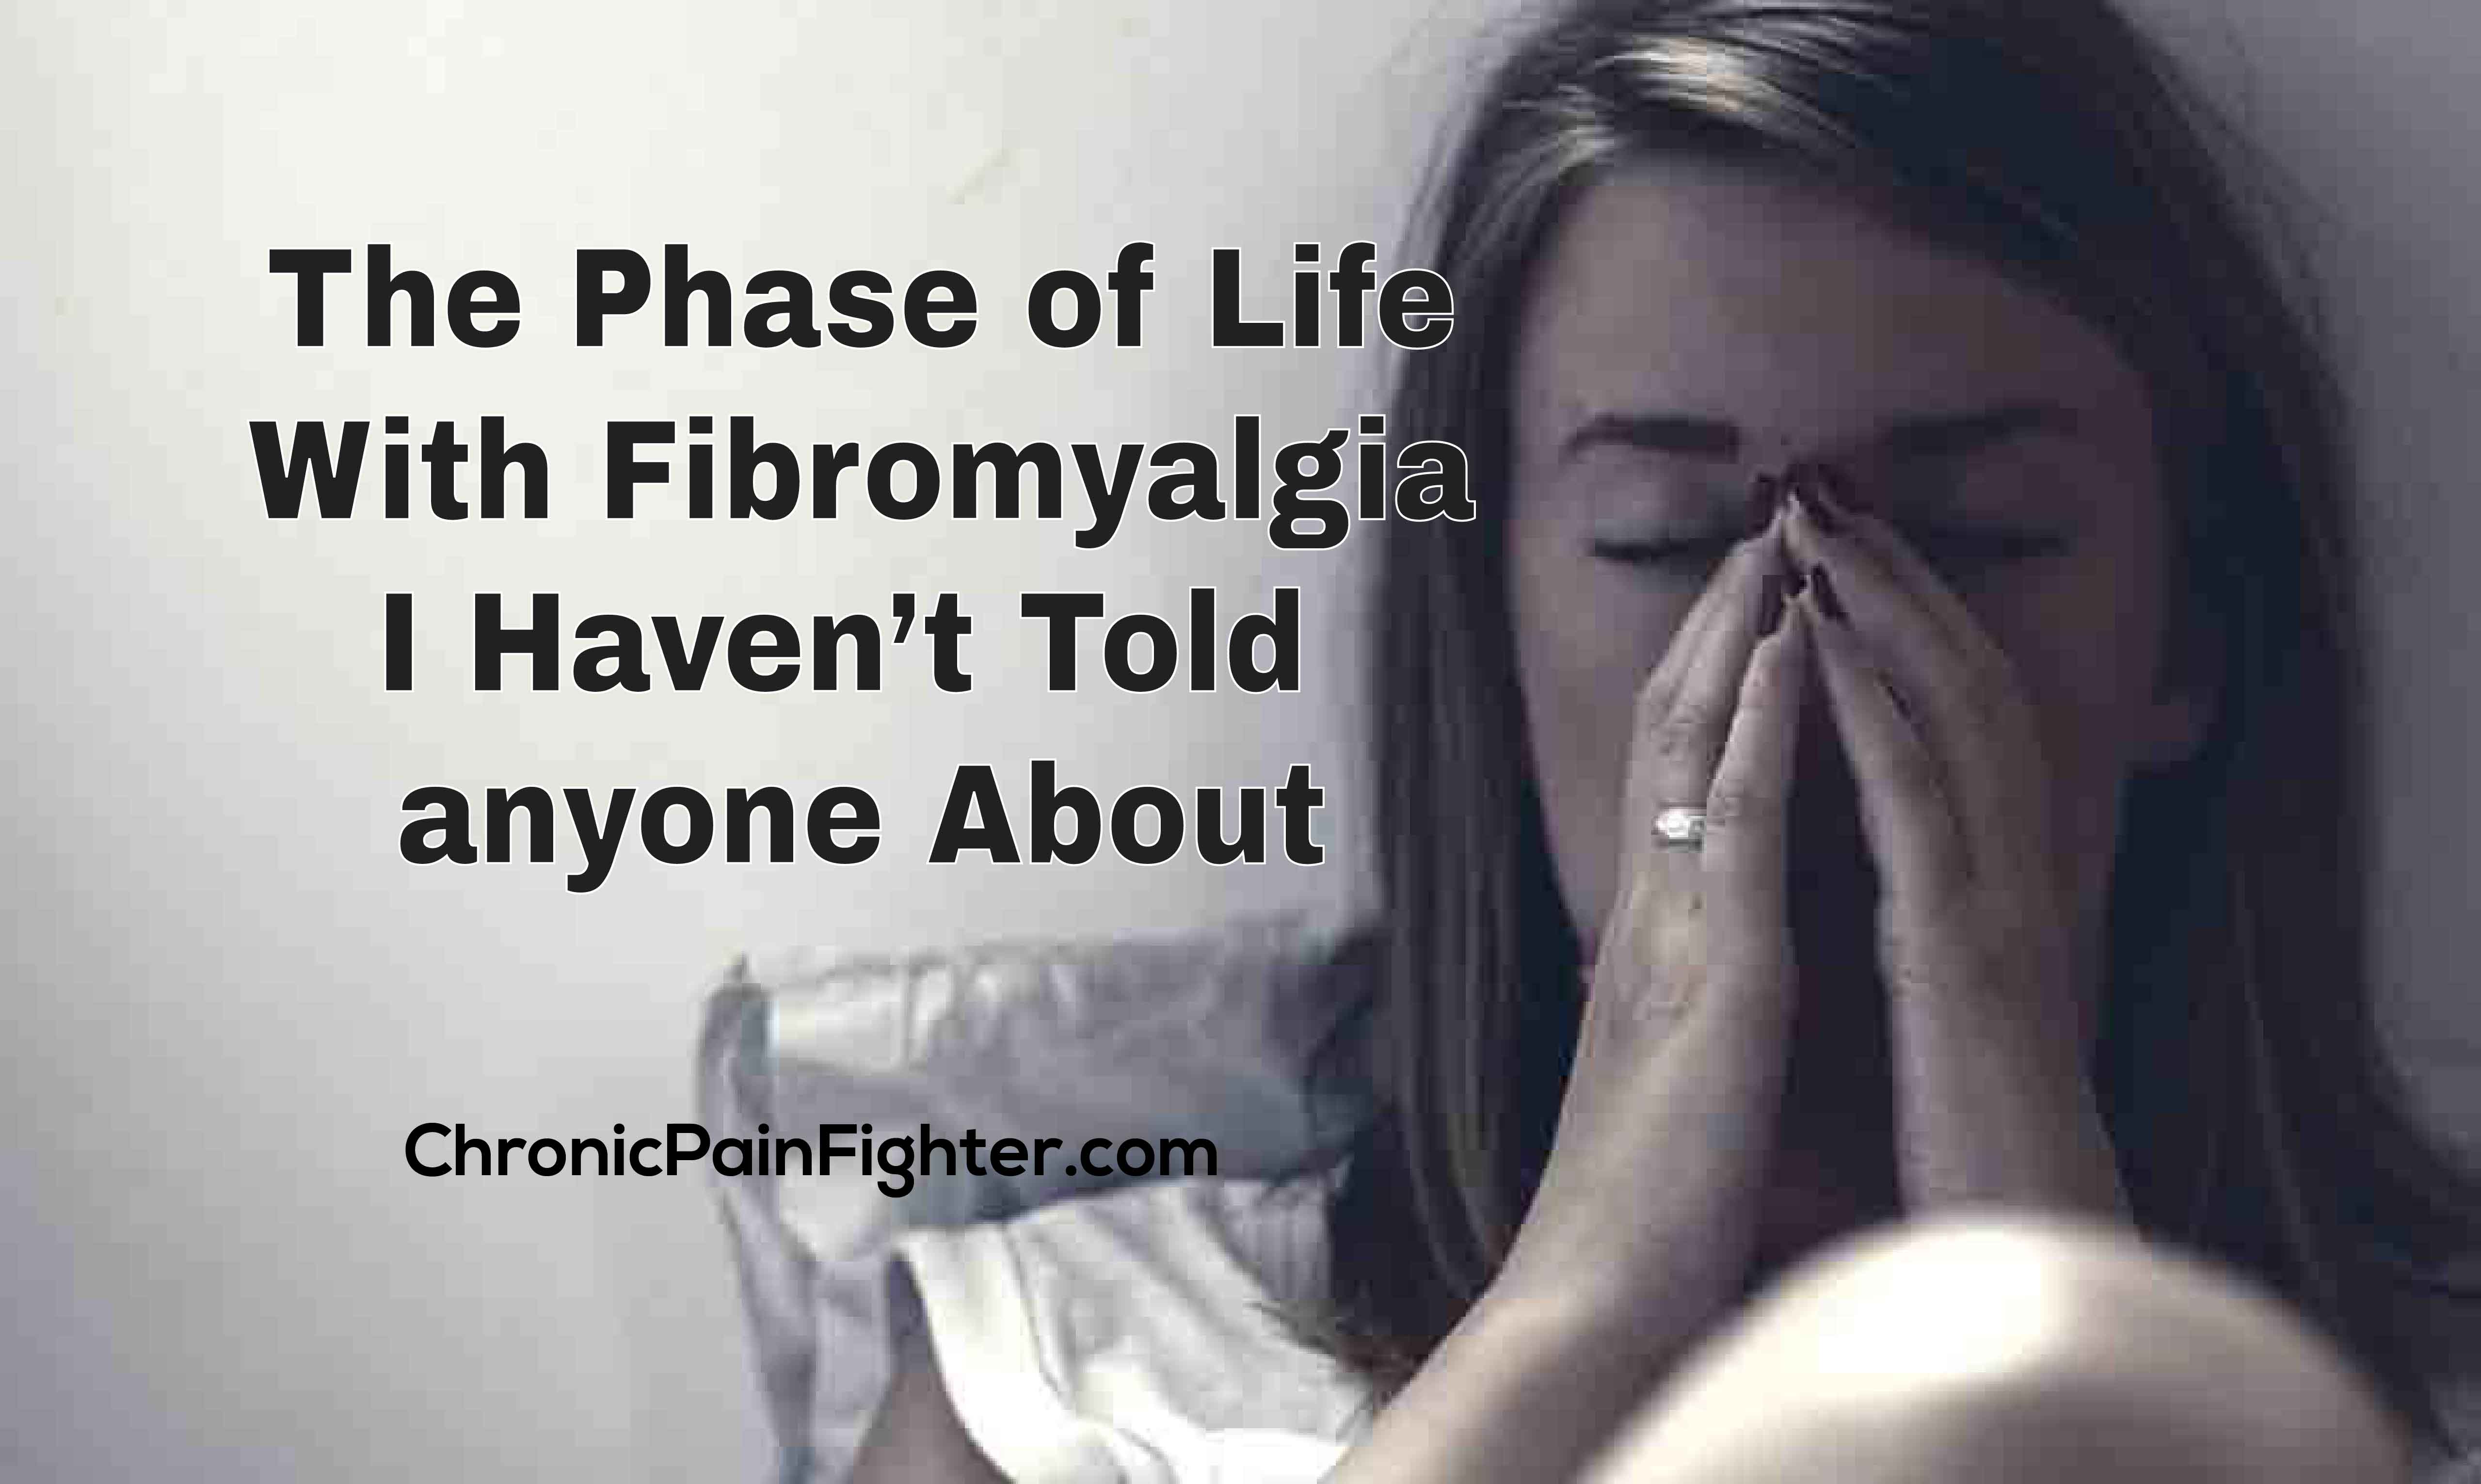 The Phase of Life With Fibromyalgia I Haven’t Told anyone About